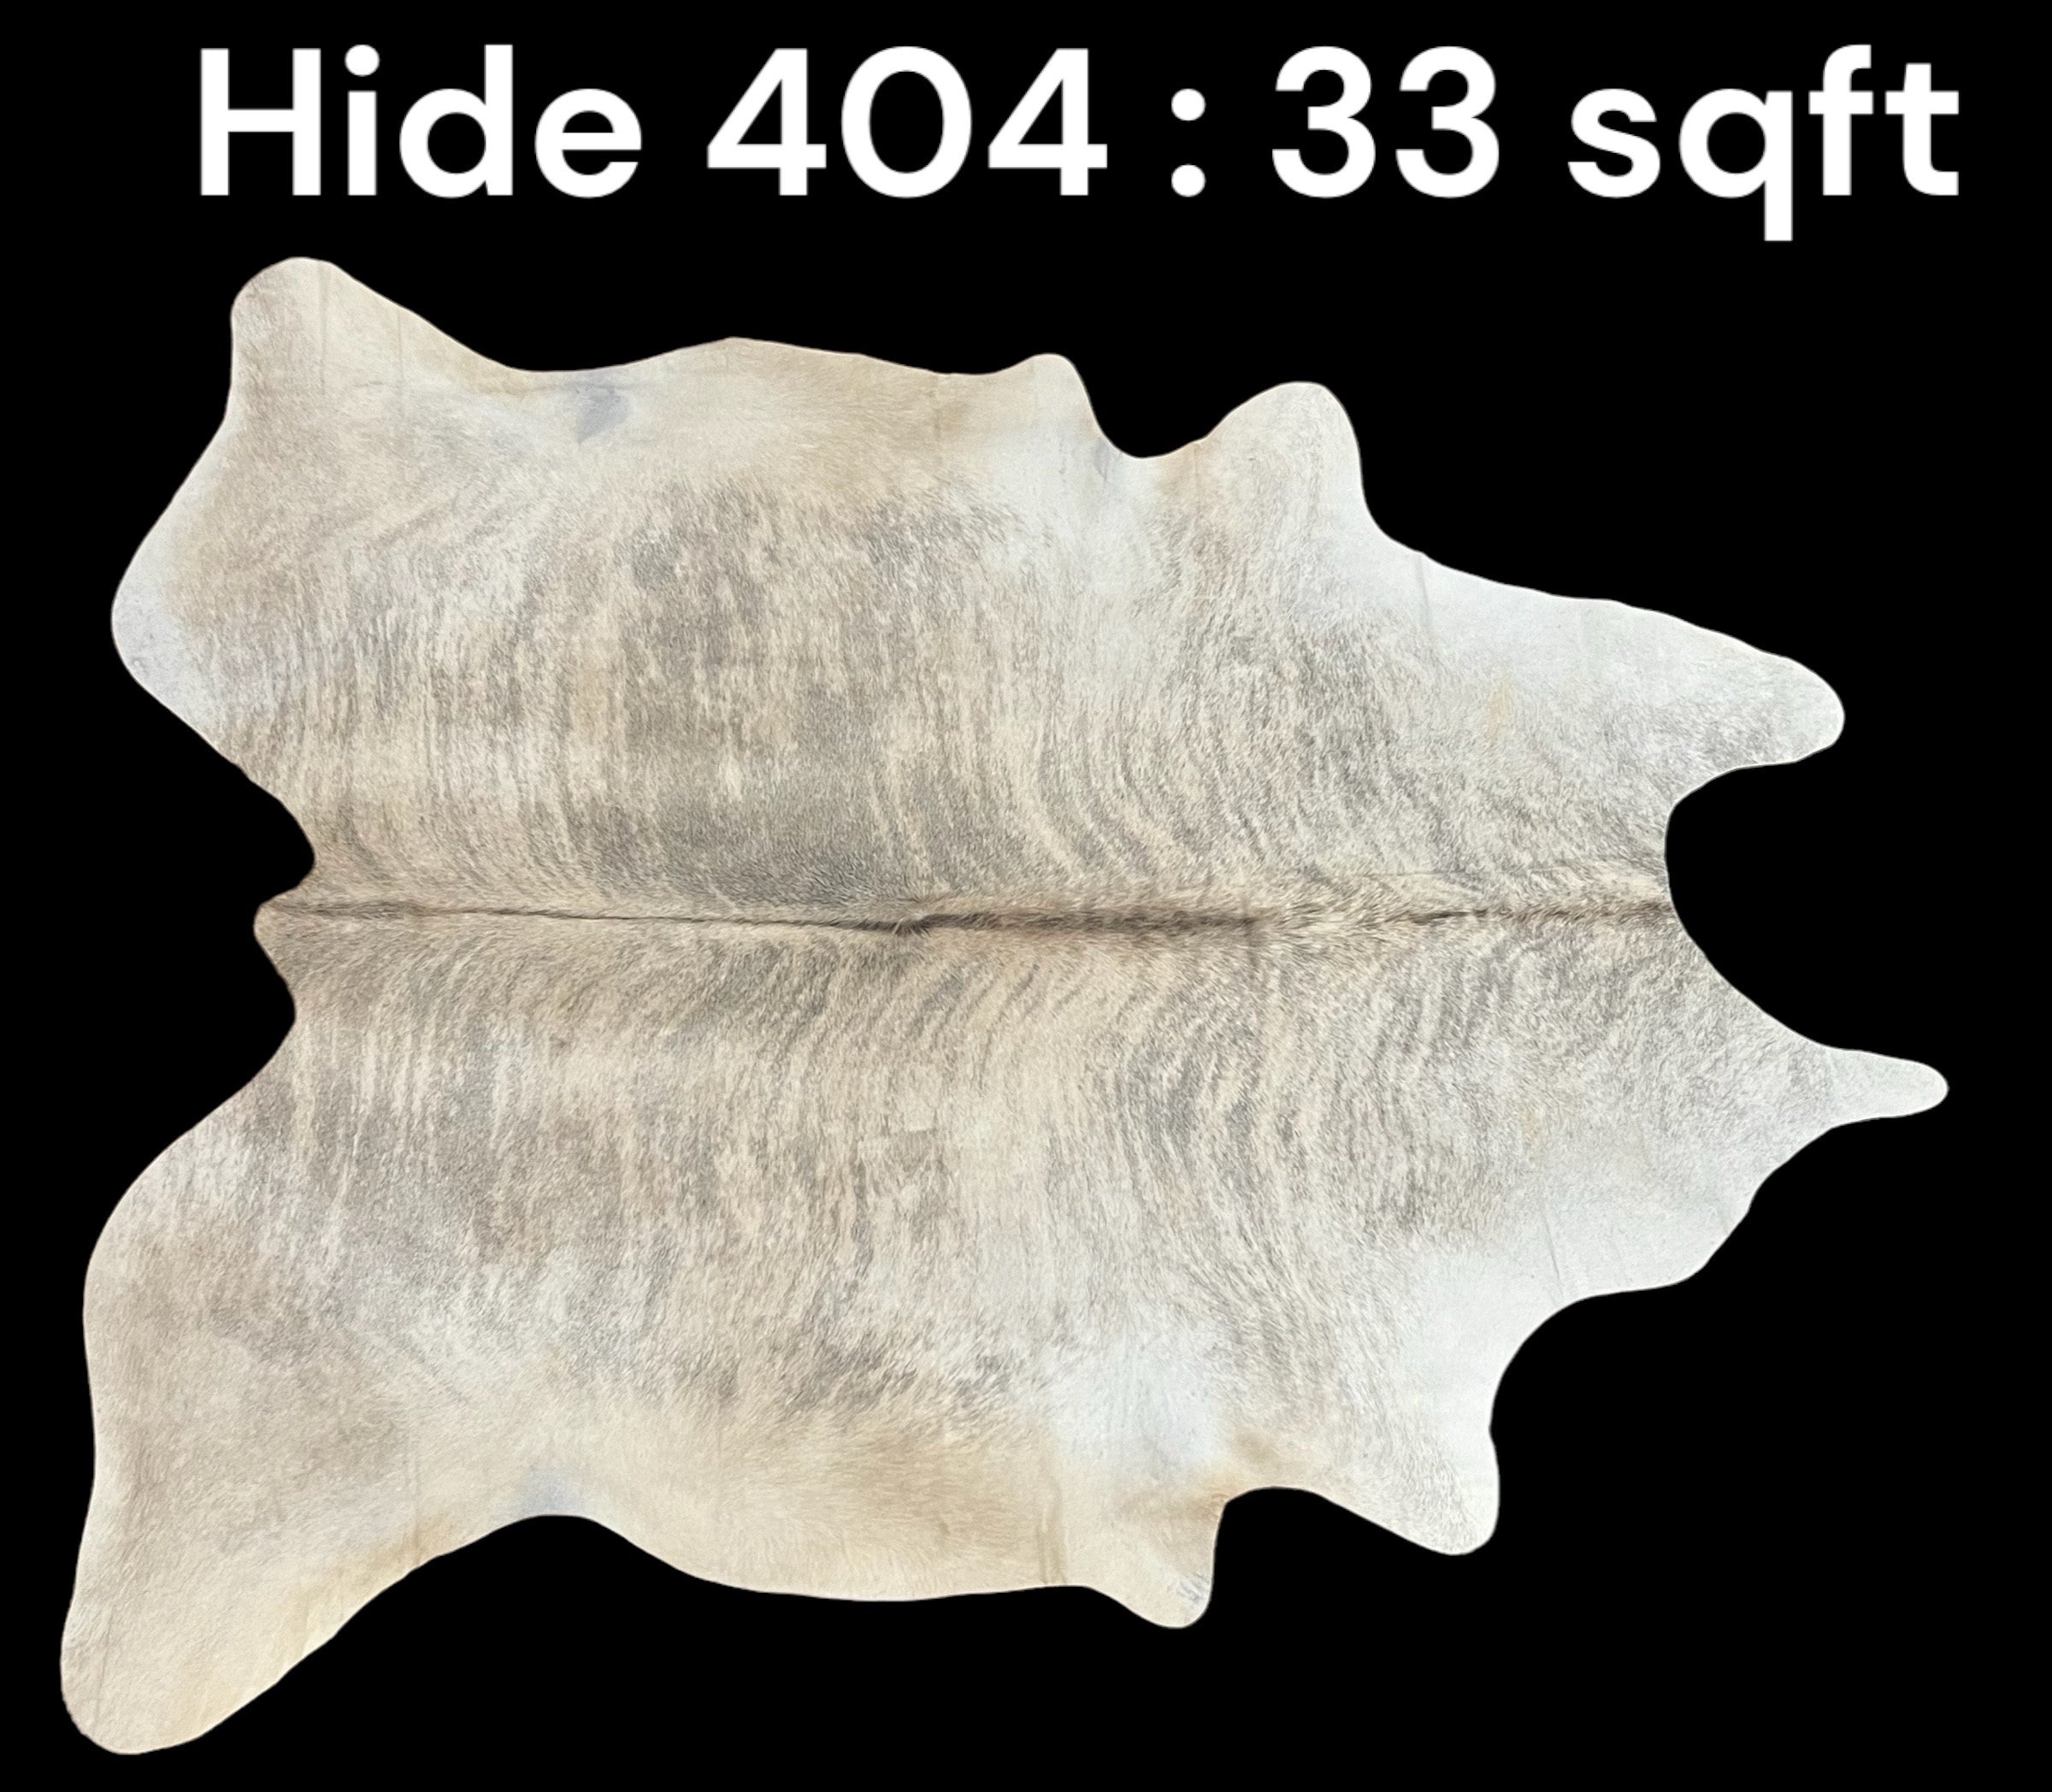 Natural Hair On Cow Hide : This Hide Is Perfect For Wall Hanging, Leather Rugs, Leather Upholstery & Leather Accessories. (Hide404)